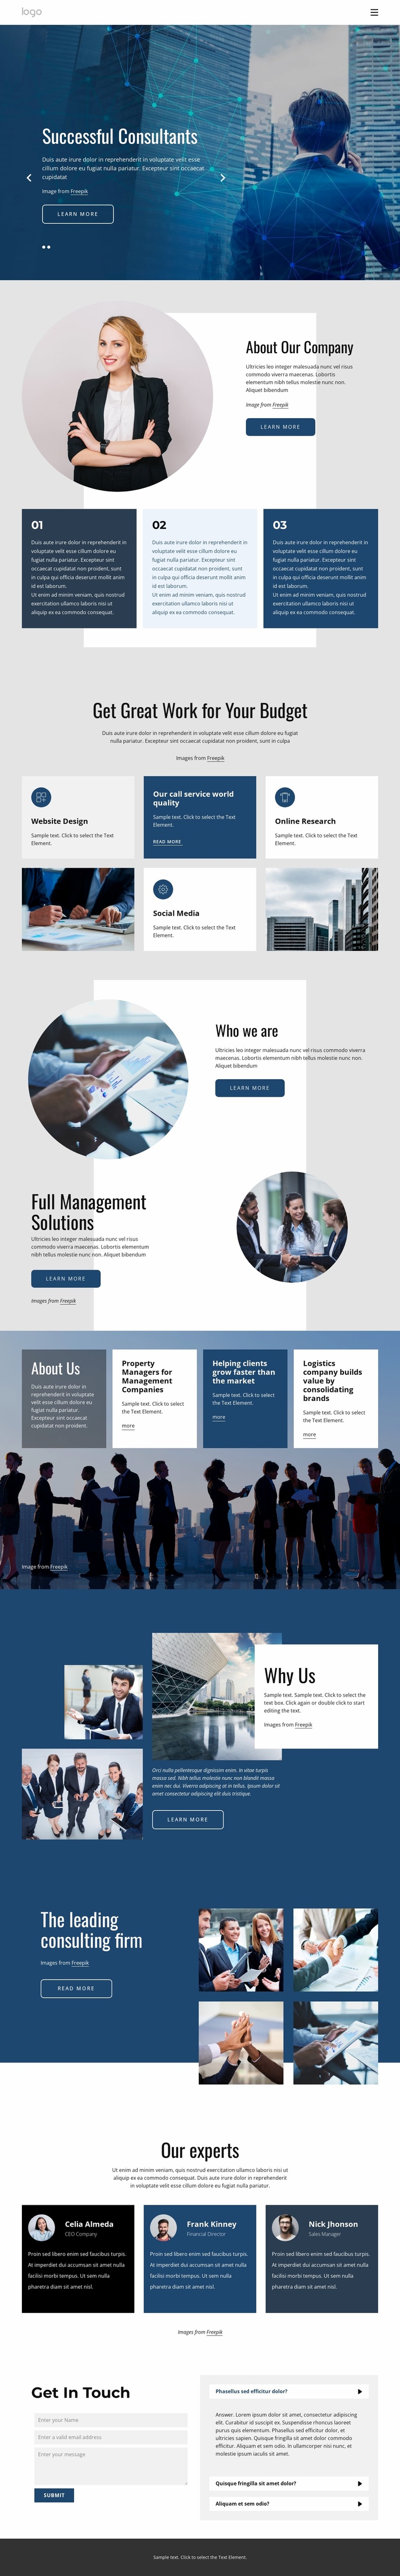 We offer tailored consulting services Website Template